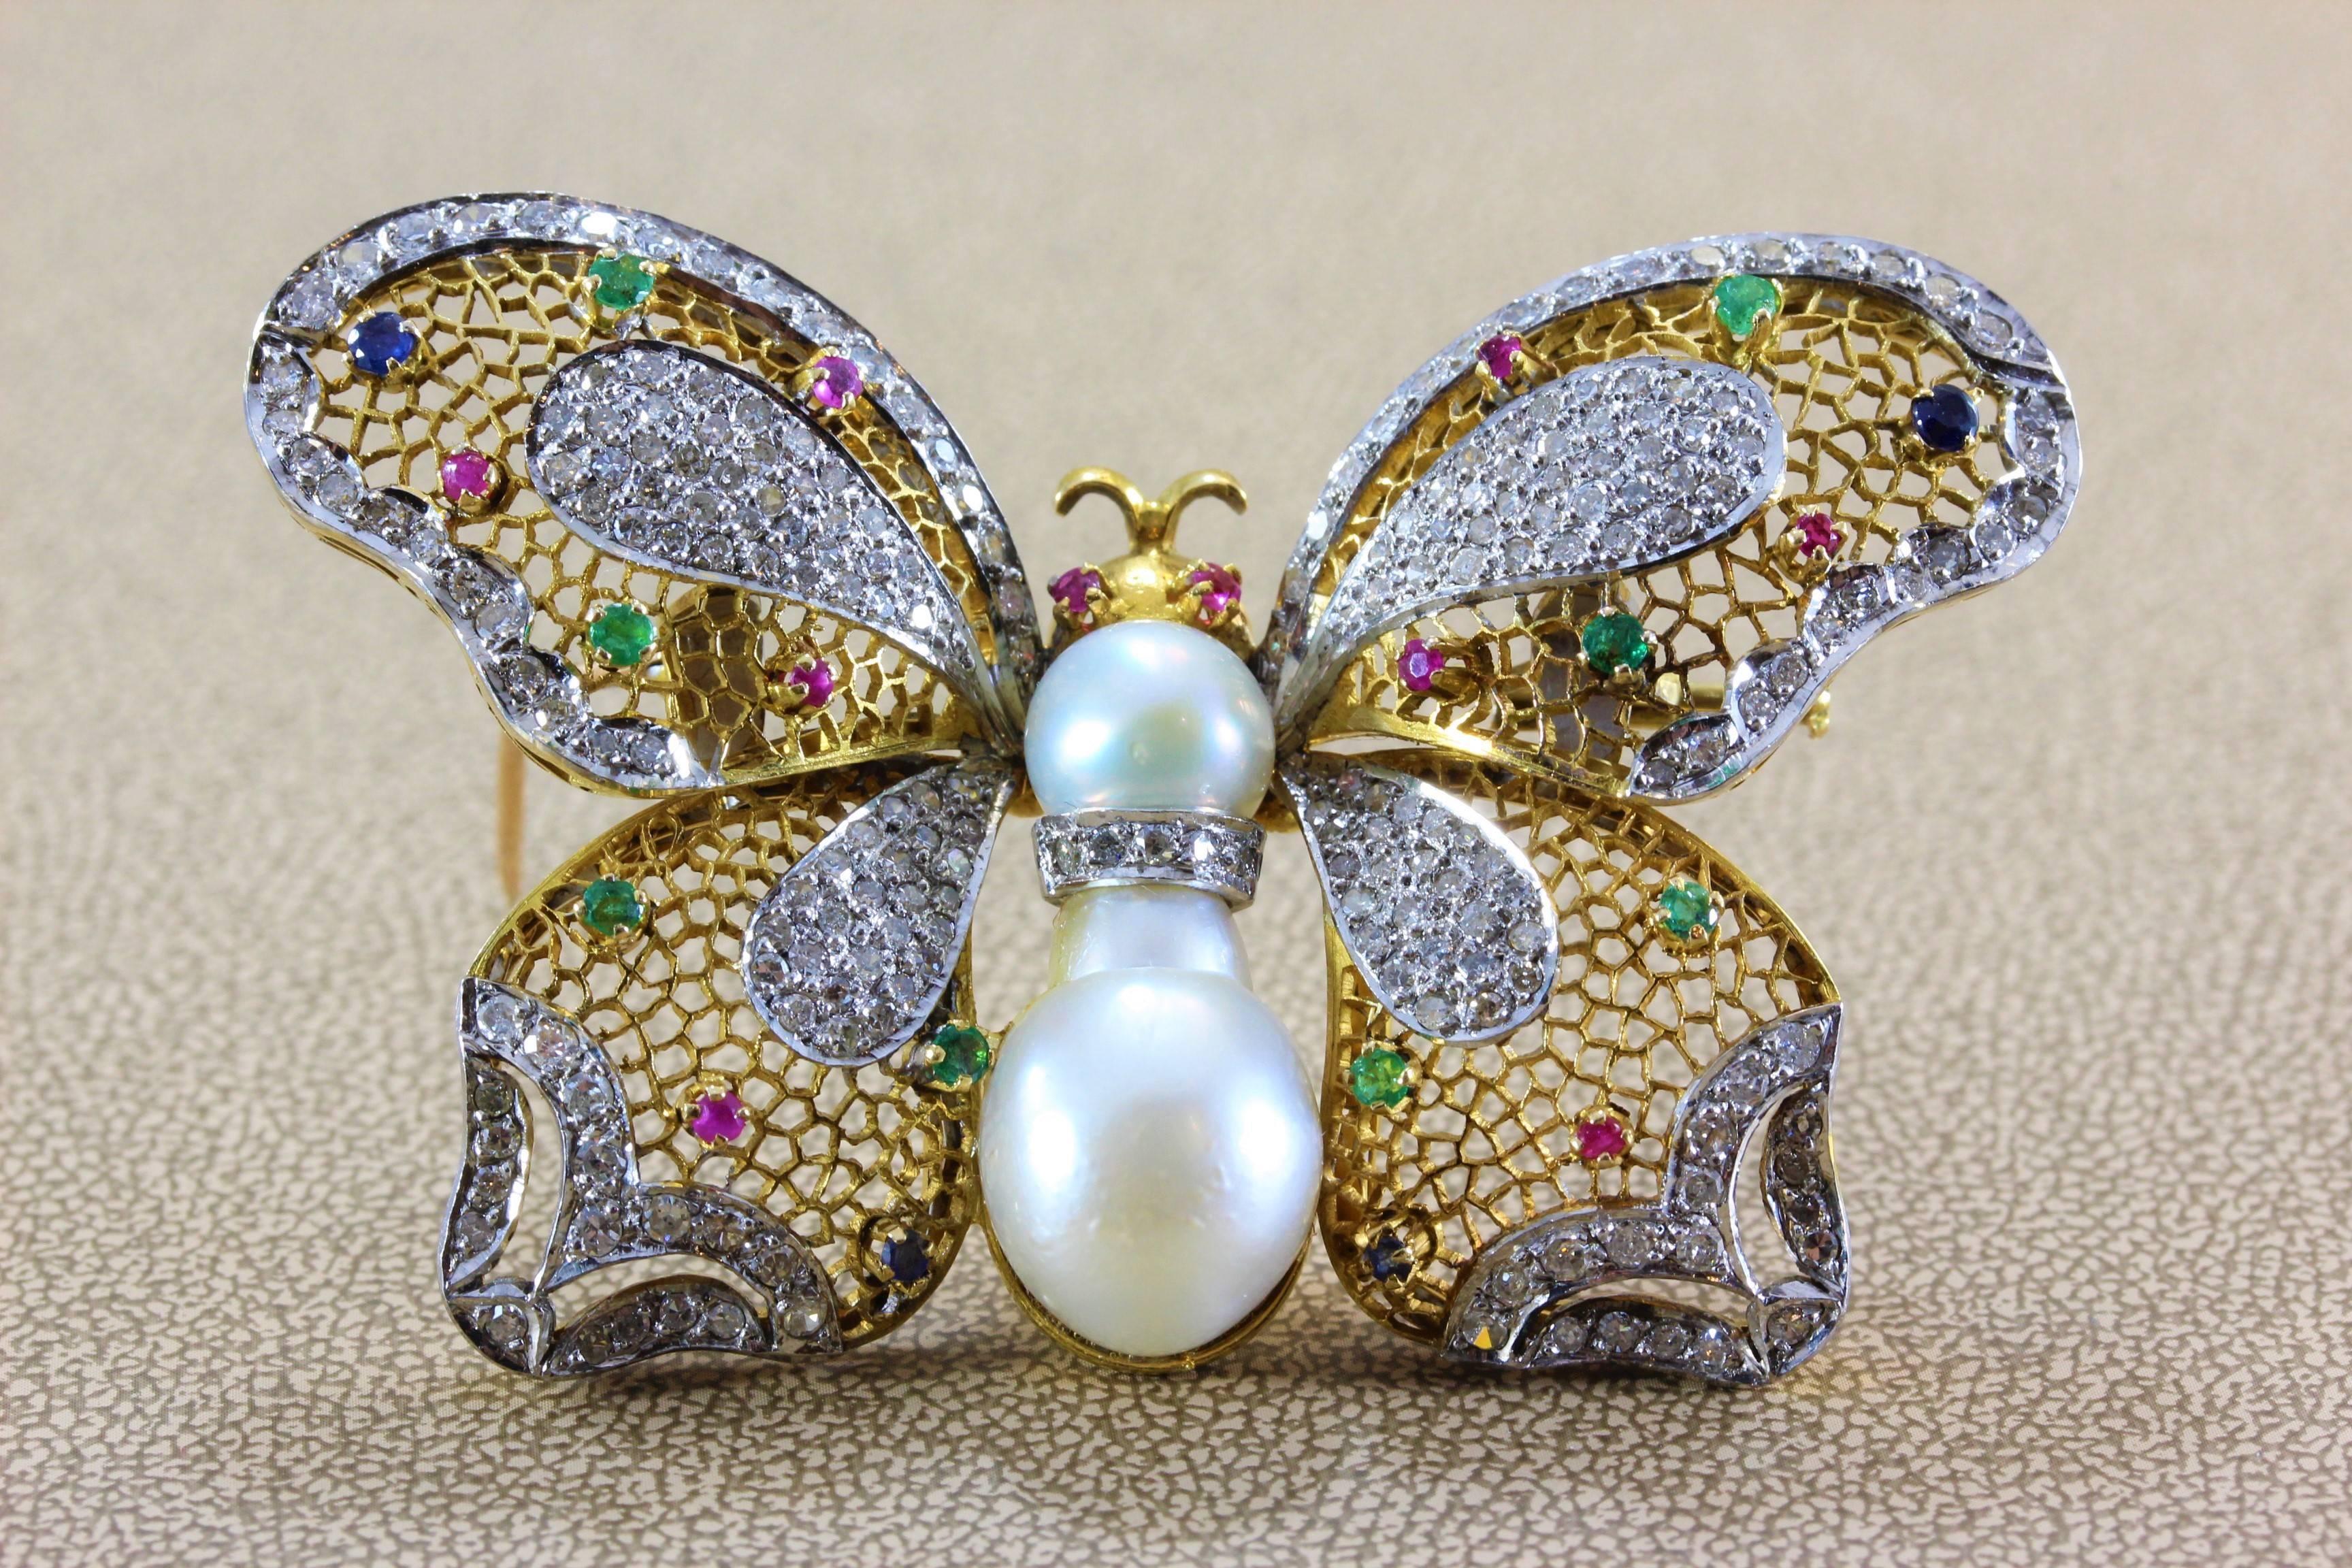 A proud butterfly featuring 2.45 carats of diamonds and studded with 0.70 carats of multi-colored gemstones including ruby, sapphire and emerald. Two fresh water pearls act as the body of the beautiful butterfly. Gems set in 18K yellow gold.